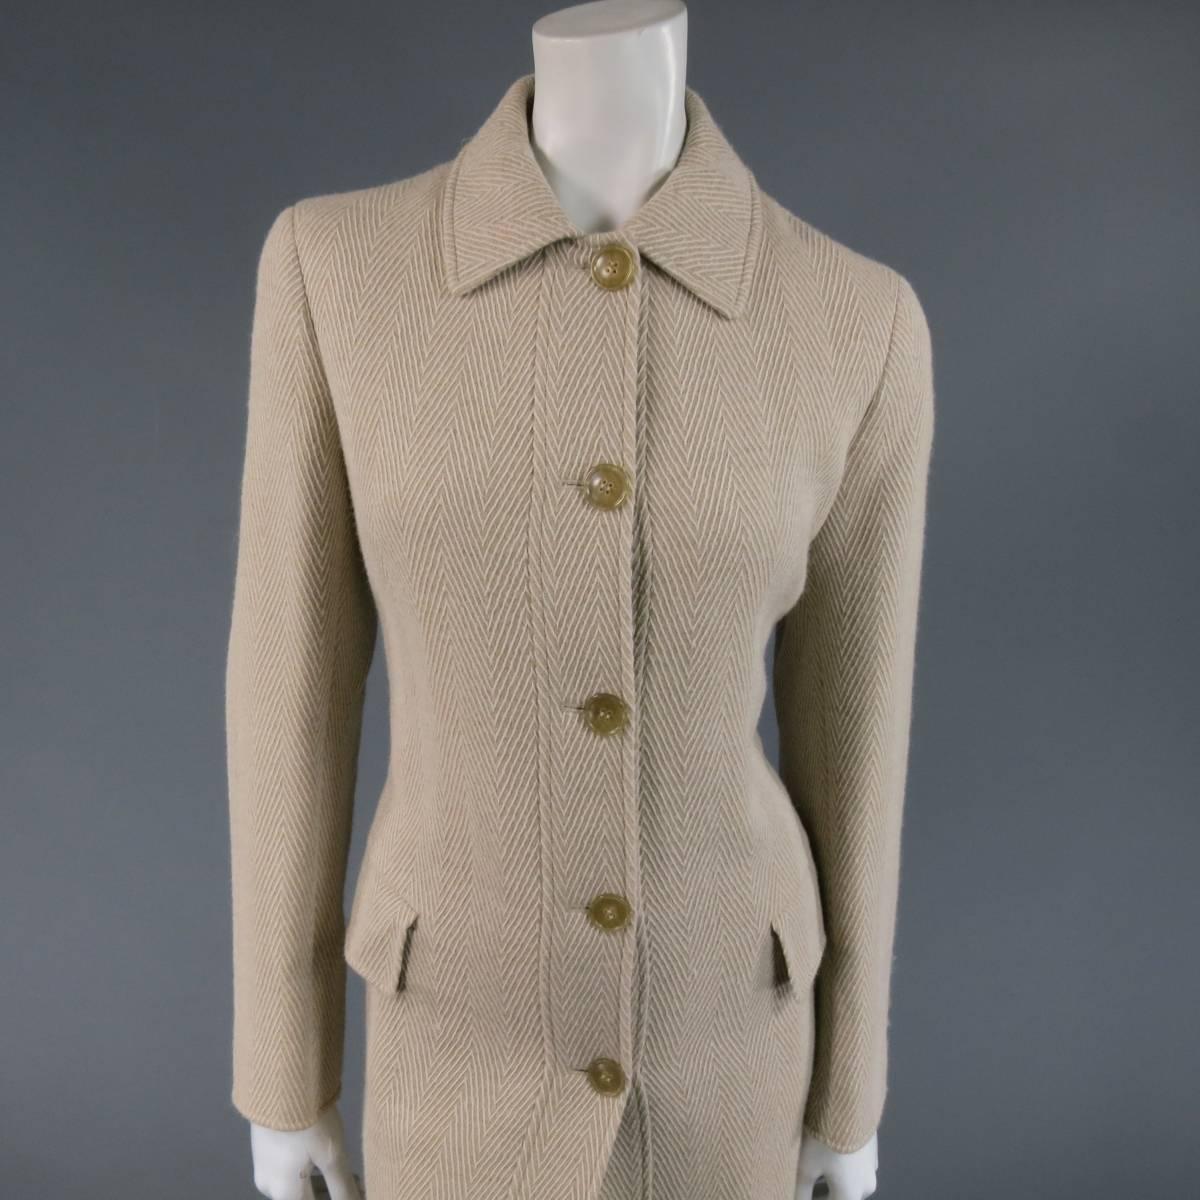 Classic LUCIANO BARBERA coat in light beige and cream Herringbone Chevron print textured alpaca with a pointed collar, five button closure, back vent, and double flap pockets. Made in Italy.
 
Excellent Pre-Owned Condition.
Marked Size: 42 IT
